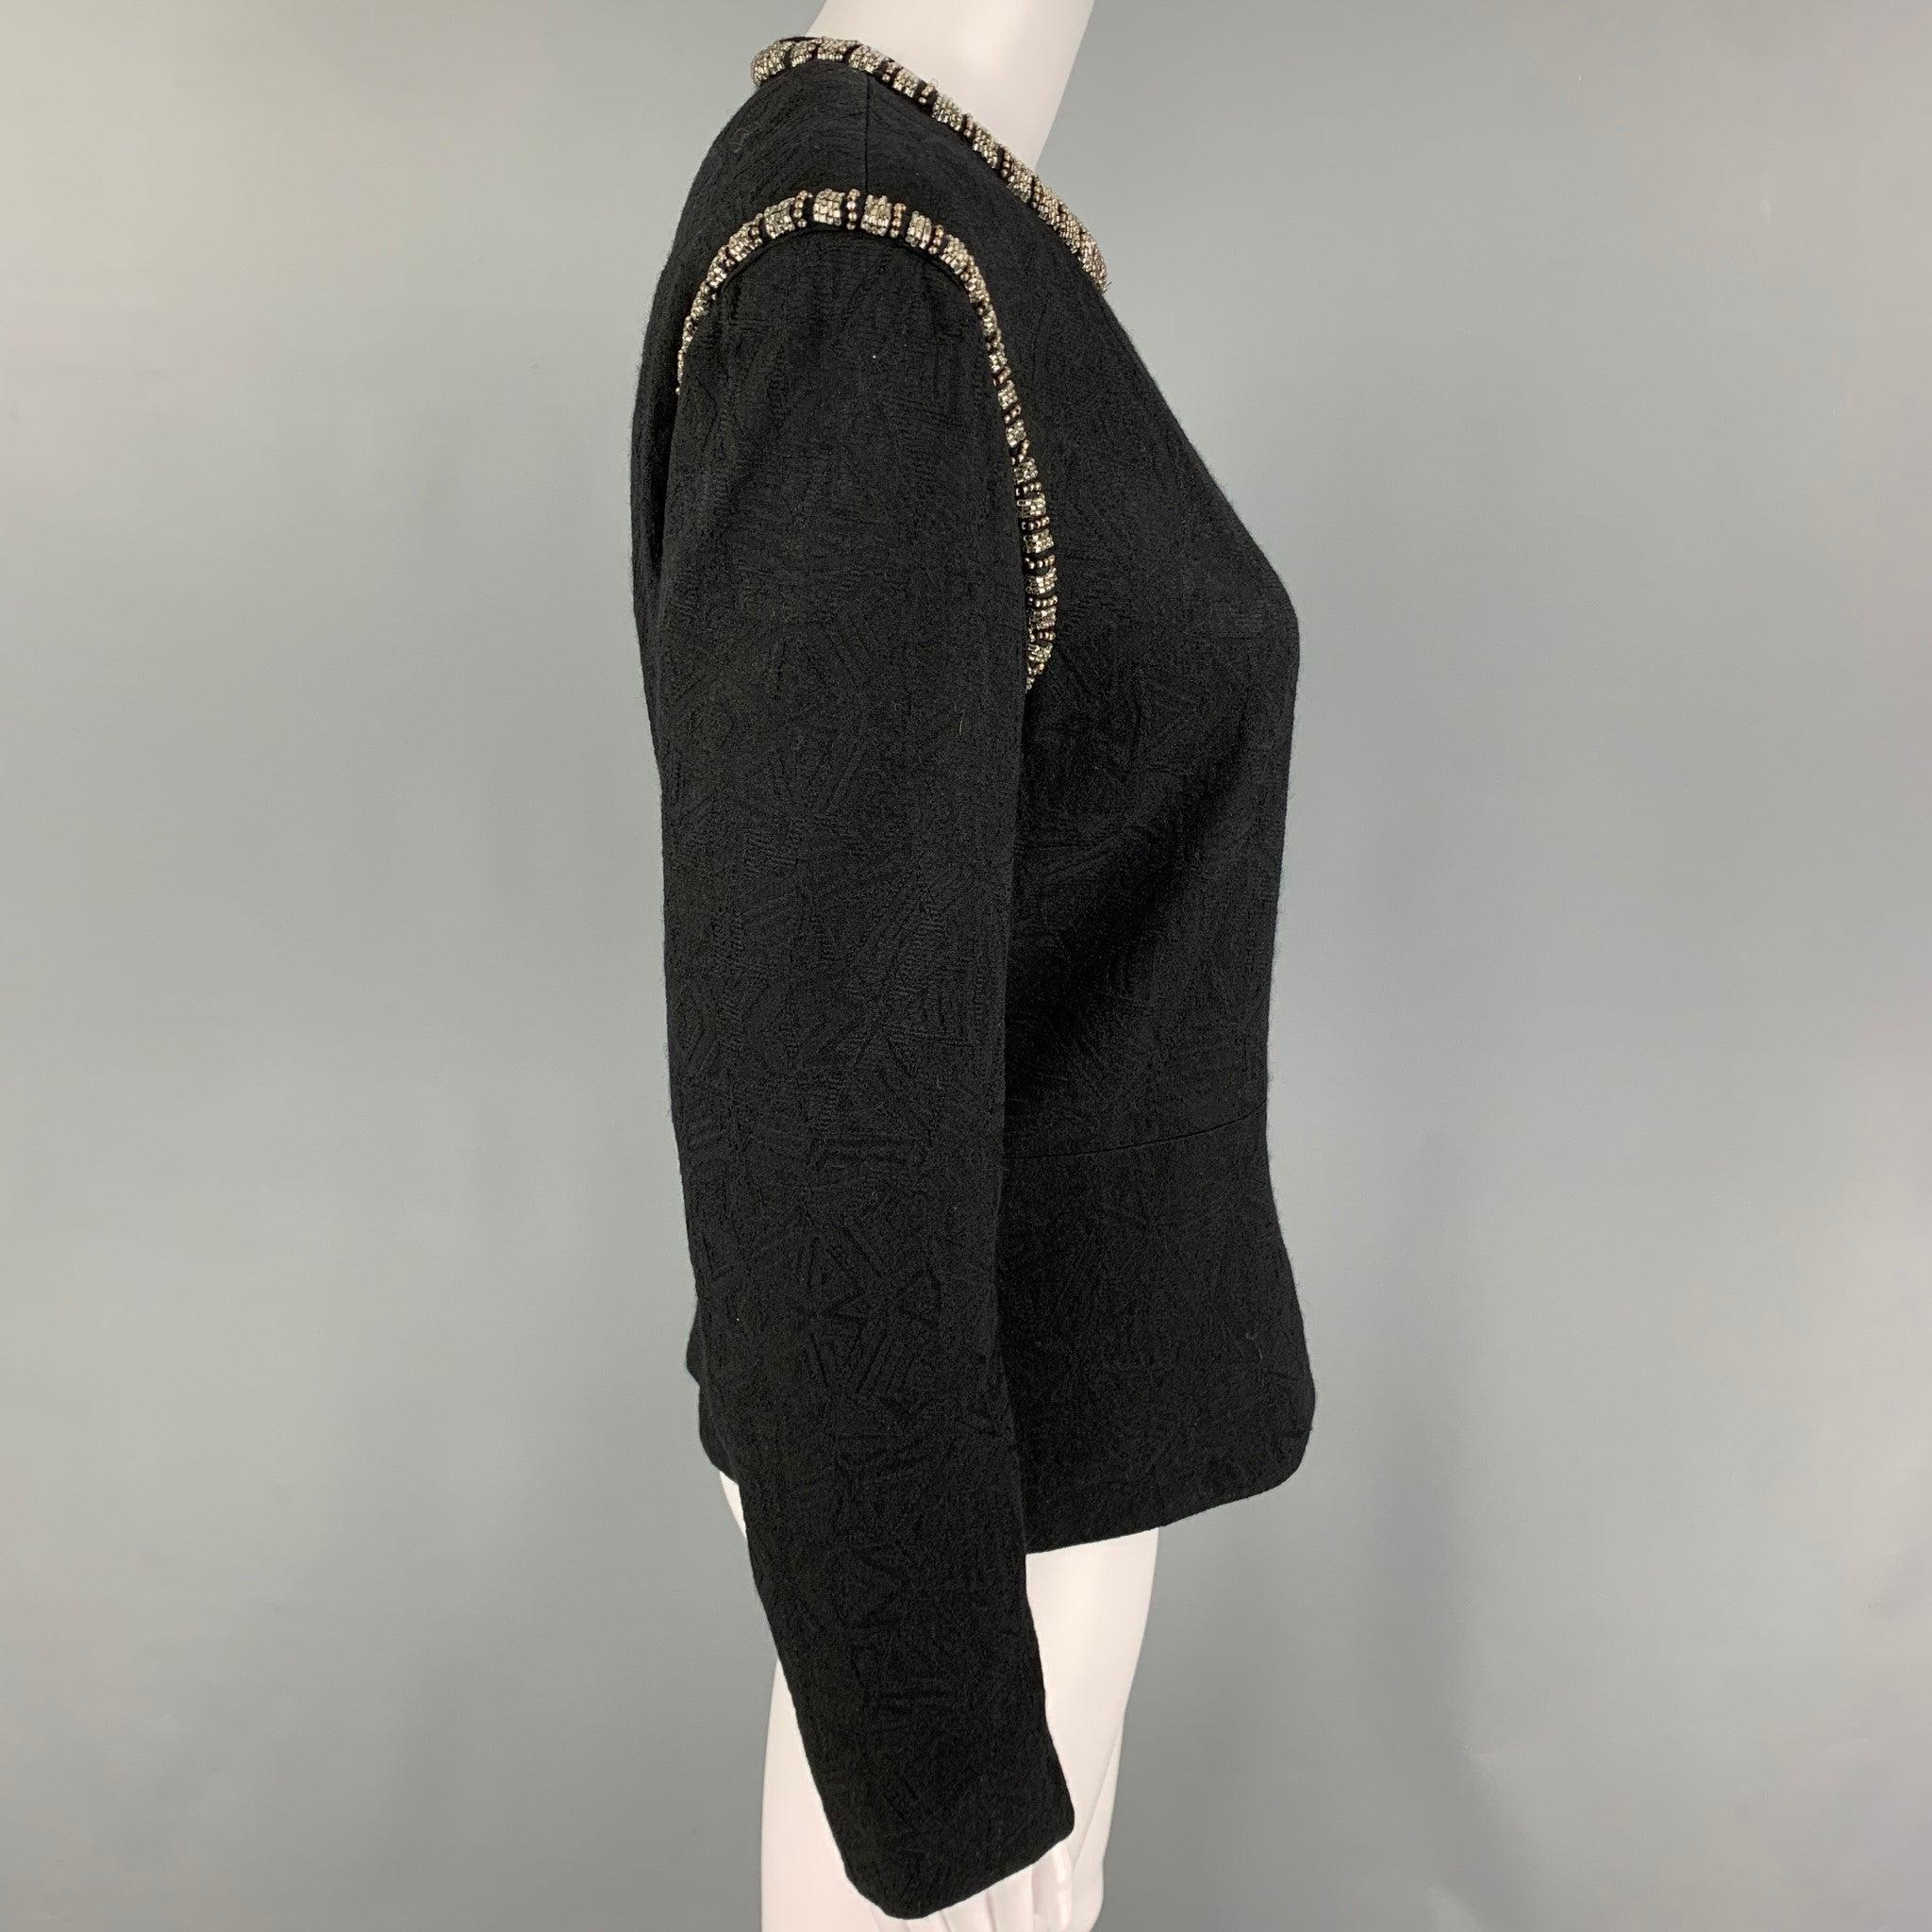 DRIES VAN NOTEN Size 6 Black Wool Blend Jacquard Crew-Neck Dress Top In Good Condition For Sale In San Francisco, CA